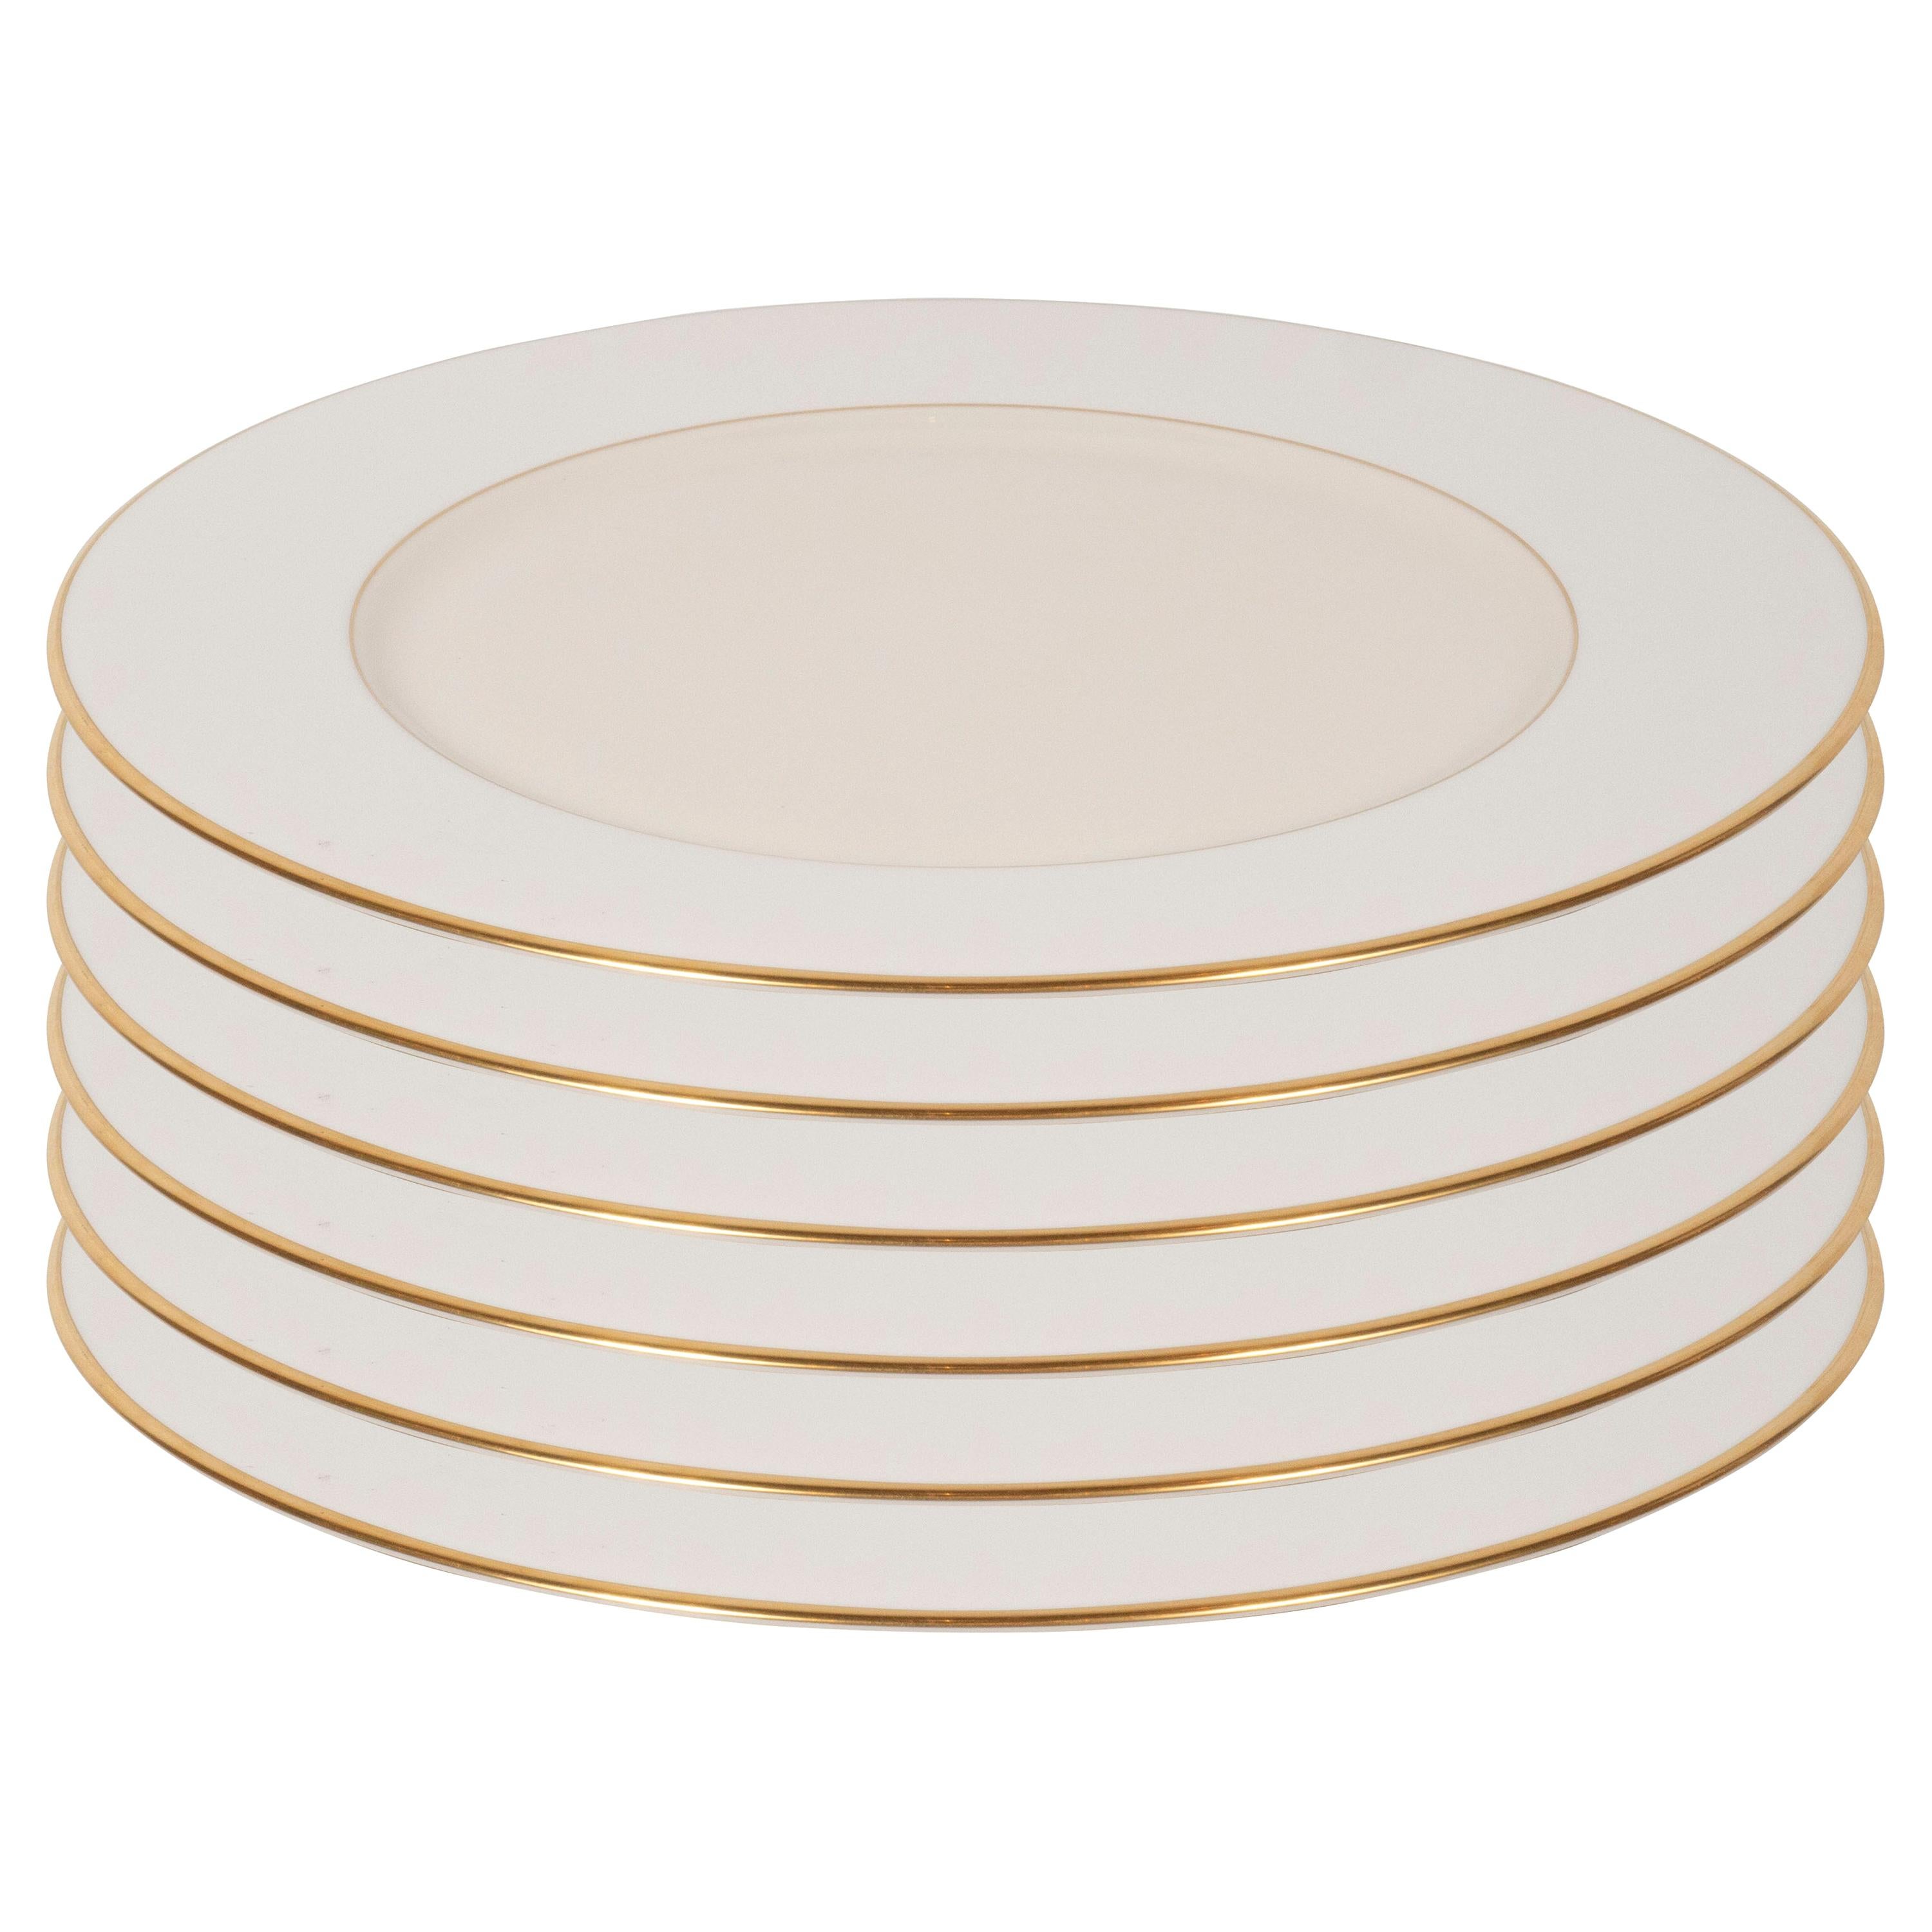 Set of Six Modernist Charger Plates in 24-Karat Gold and Bone China by Lenox